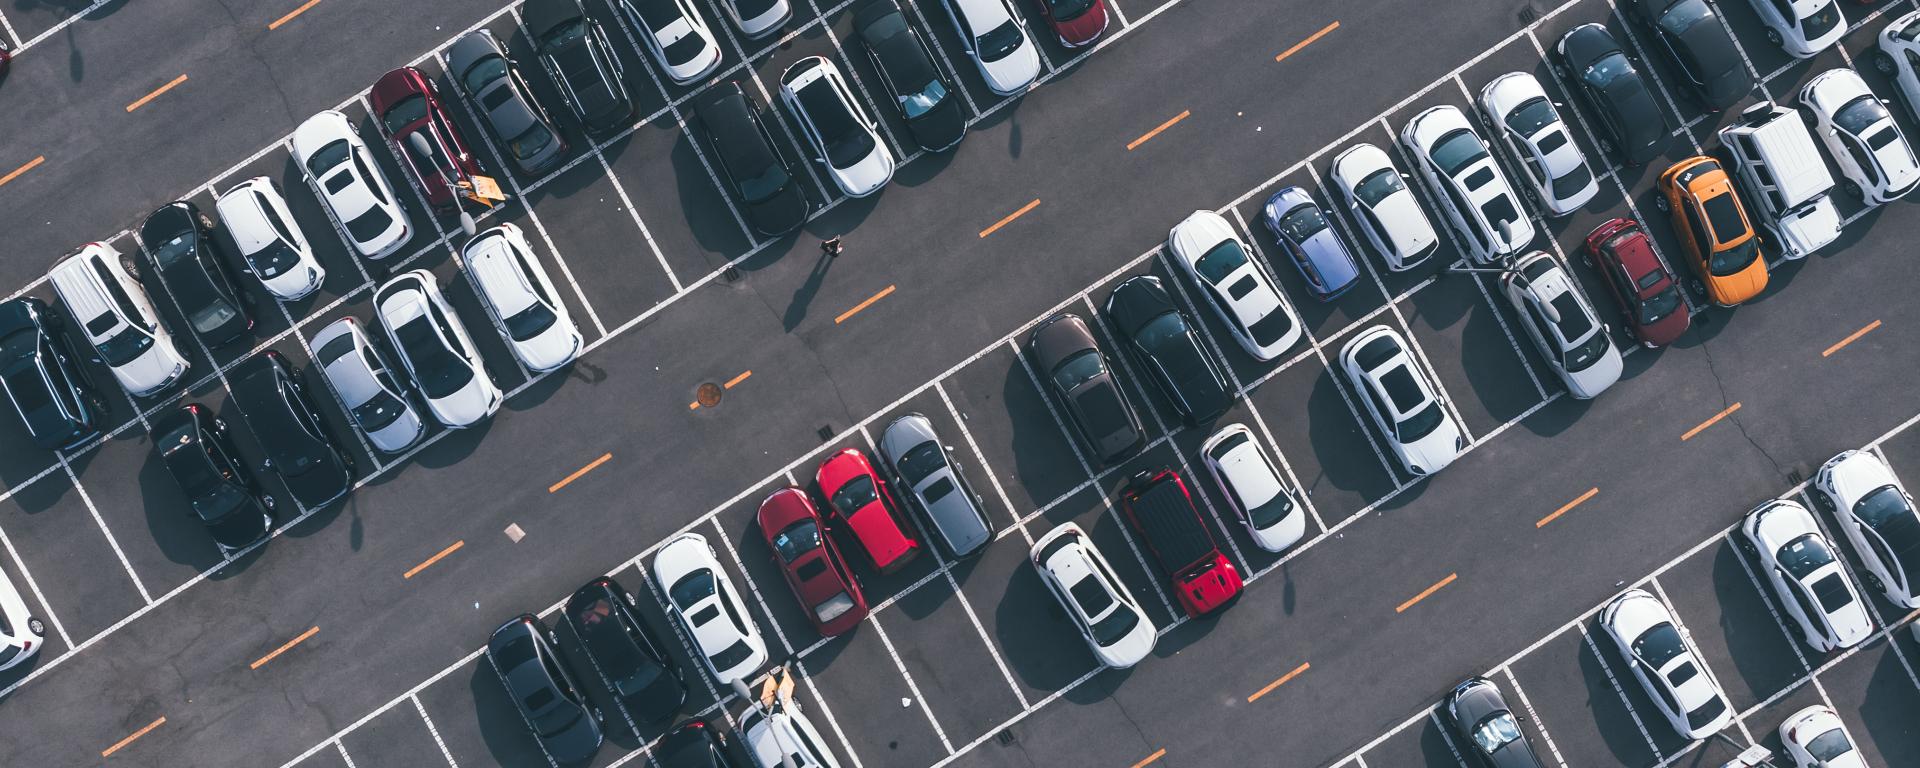 Parking lot aerial picture